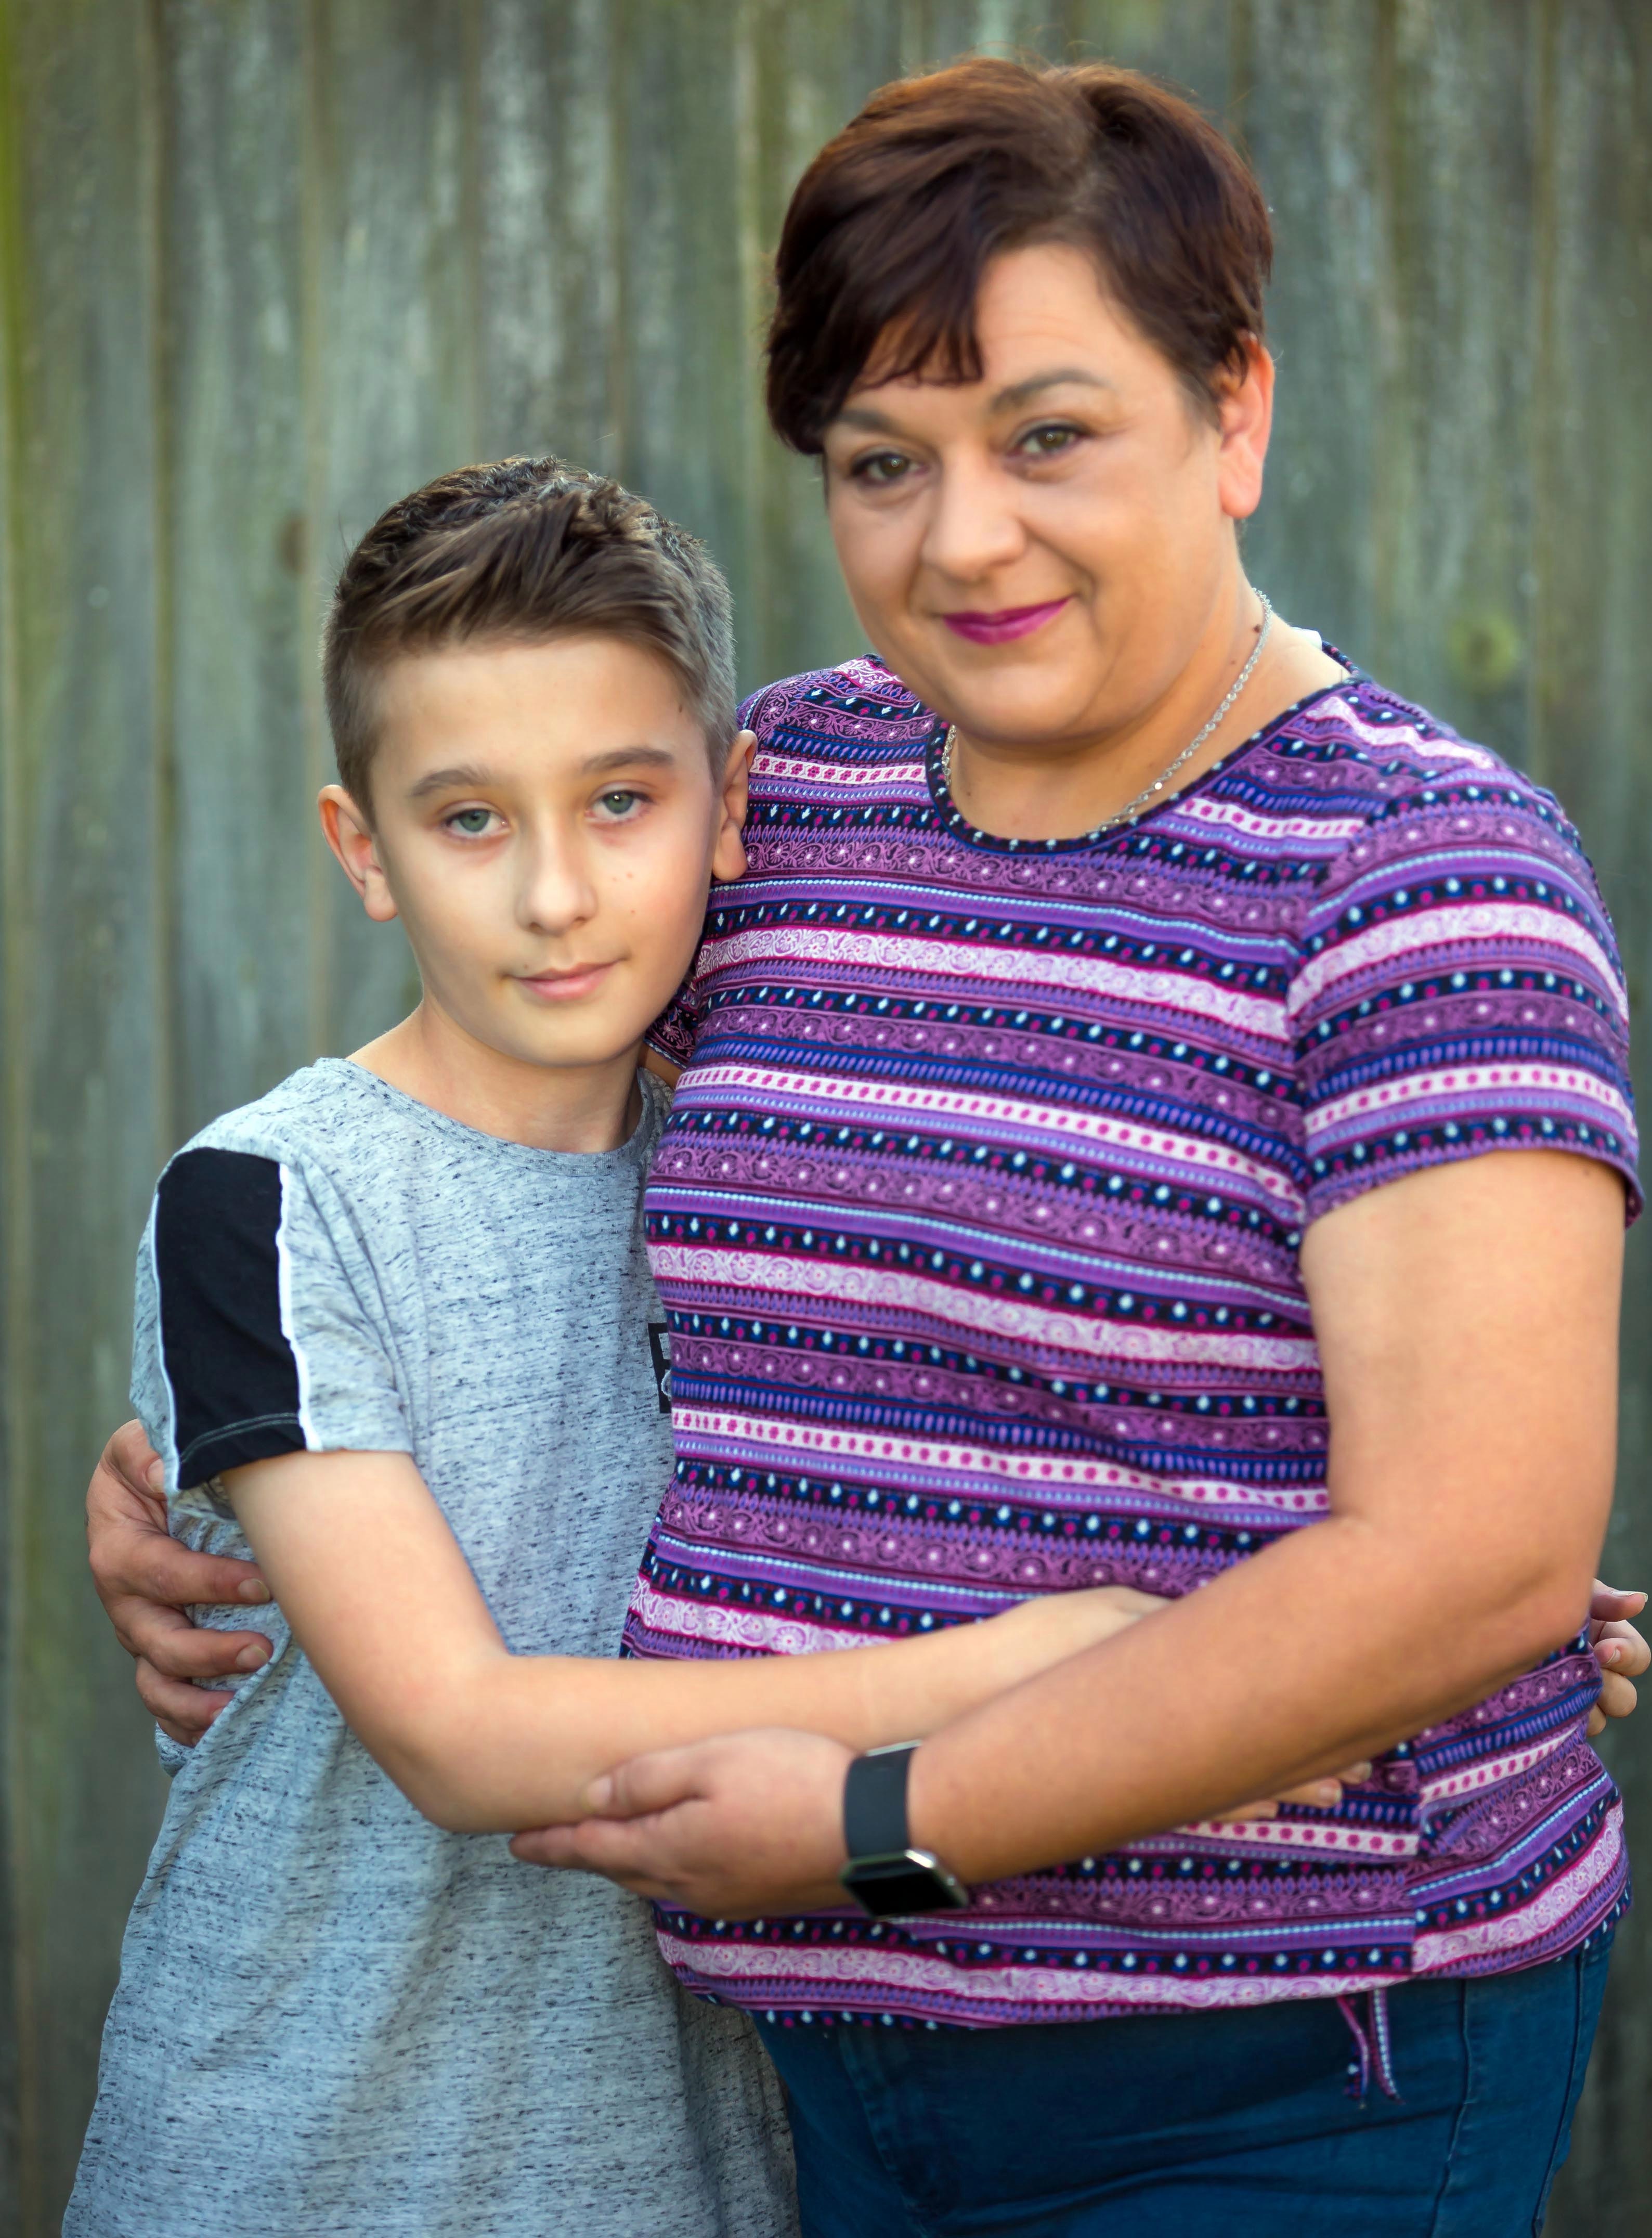  Ben's mum Catrina eventually contacted a charity for eating disorders and realised her son was suffering from AFRID